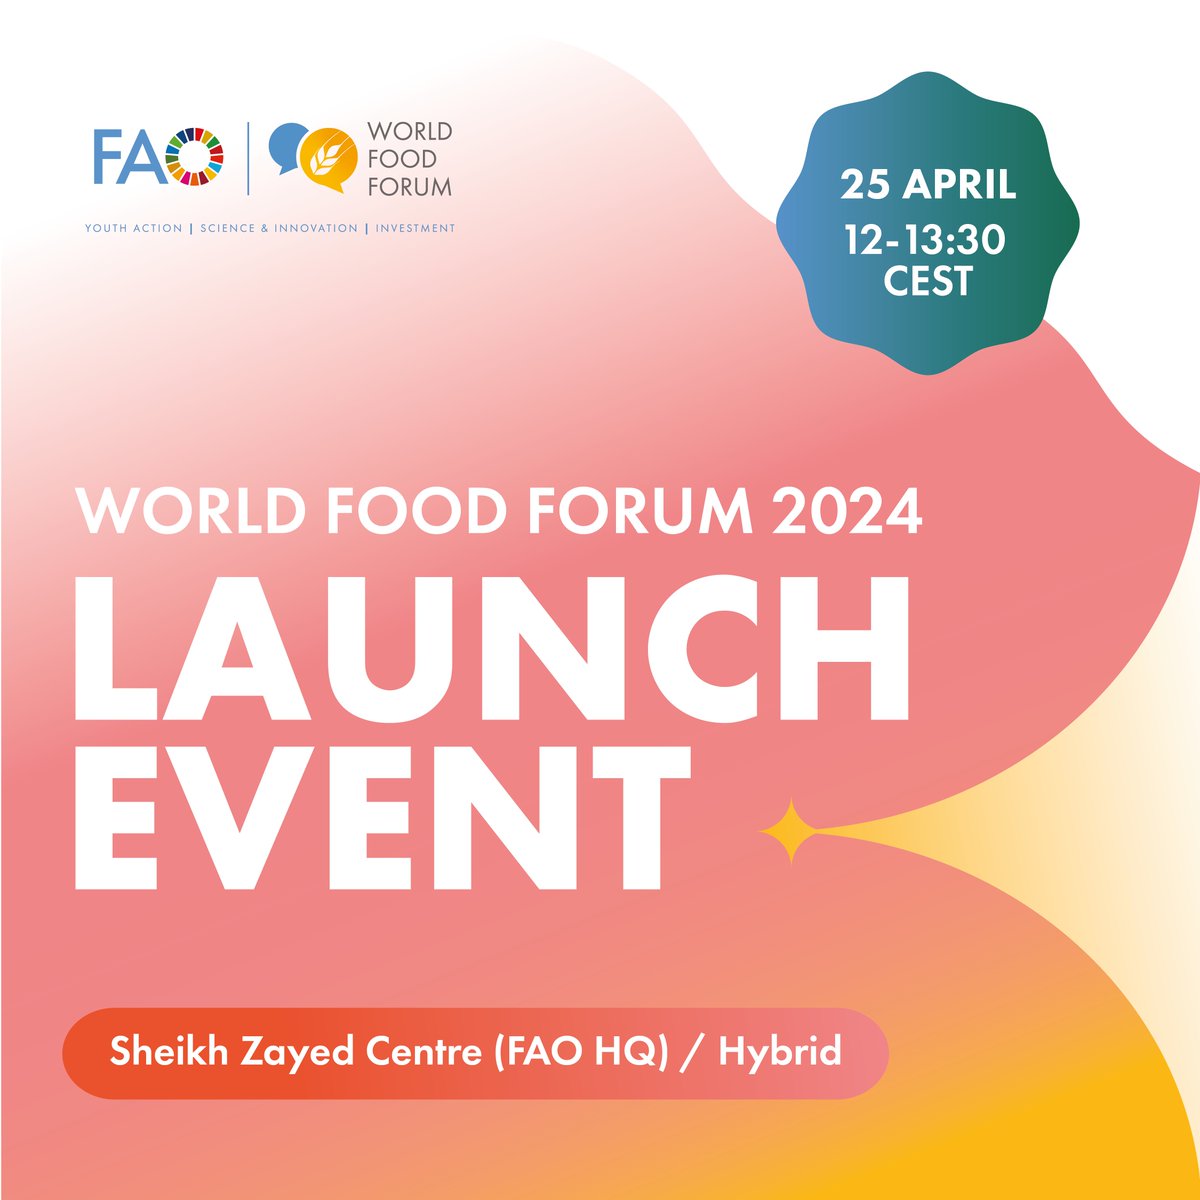 📣Get ready for a dynamic launch event featuring the Global Youth Forum, the FAO Science and Innovation Forum and the FAO Hand-in-Hand Investment Forum! 📆 25 April, 12:00 - 13:30 CEST Mark your calendars and tune into the live webcast: webtv.un.org/en/asset/k1g/k…